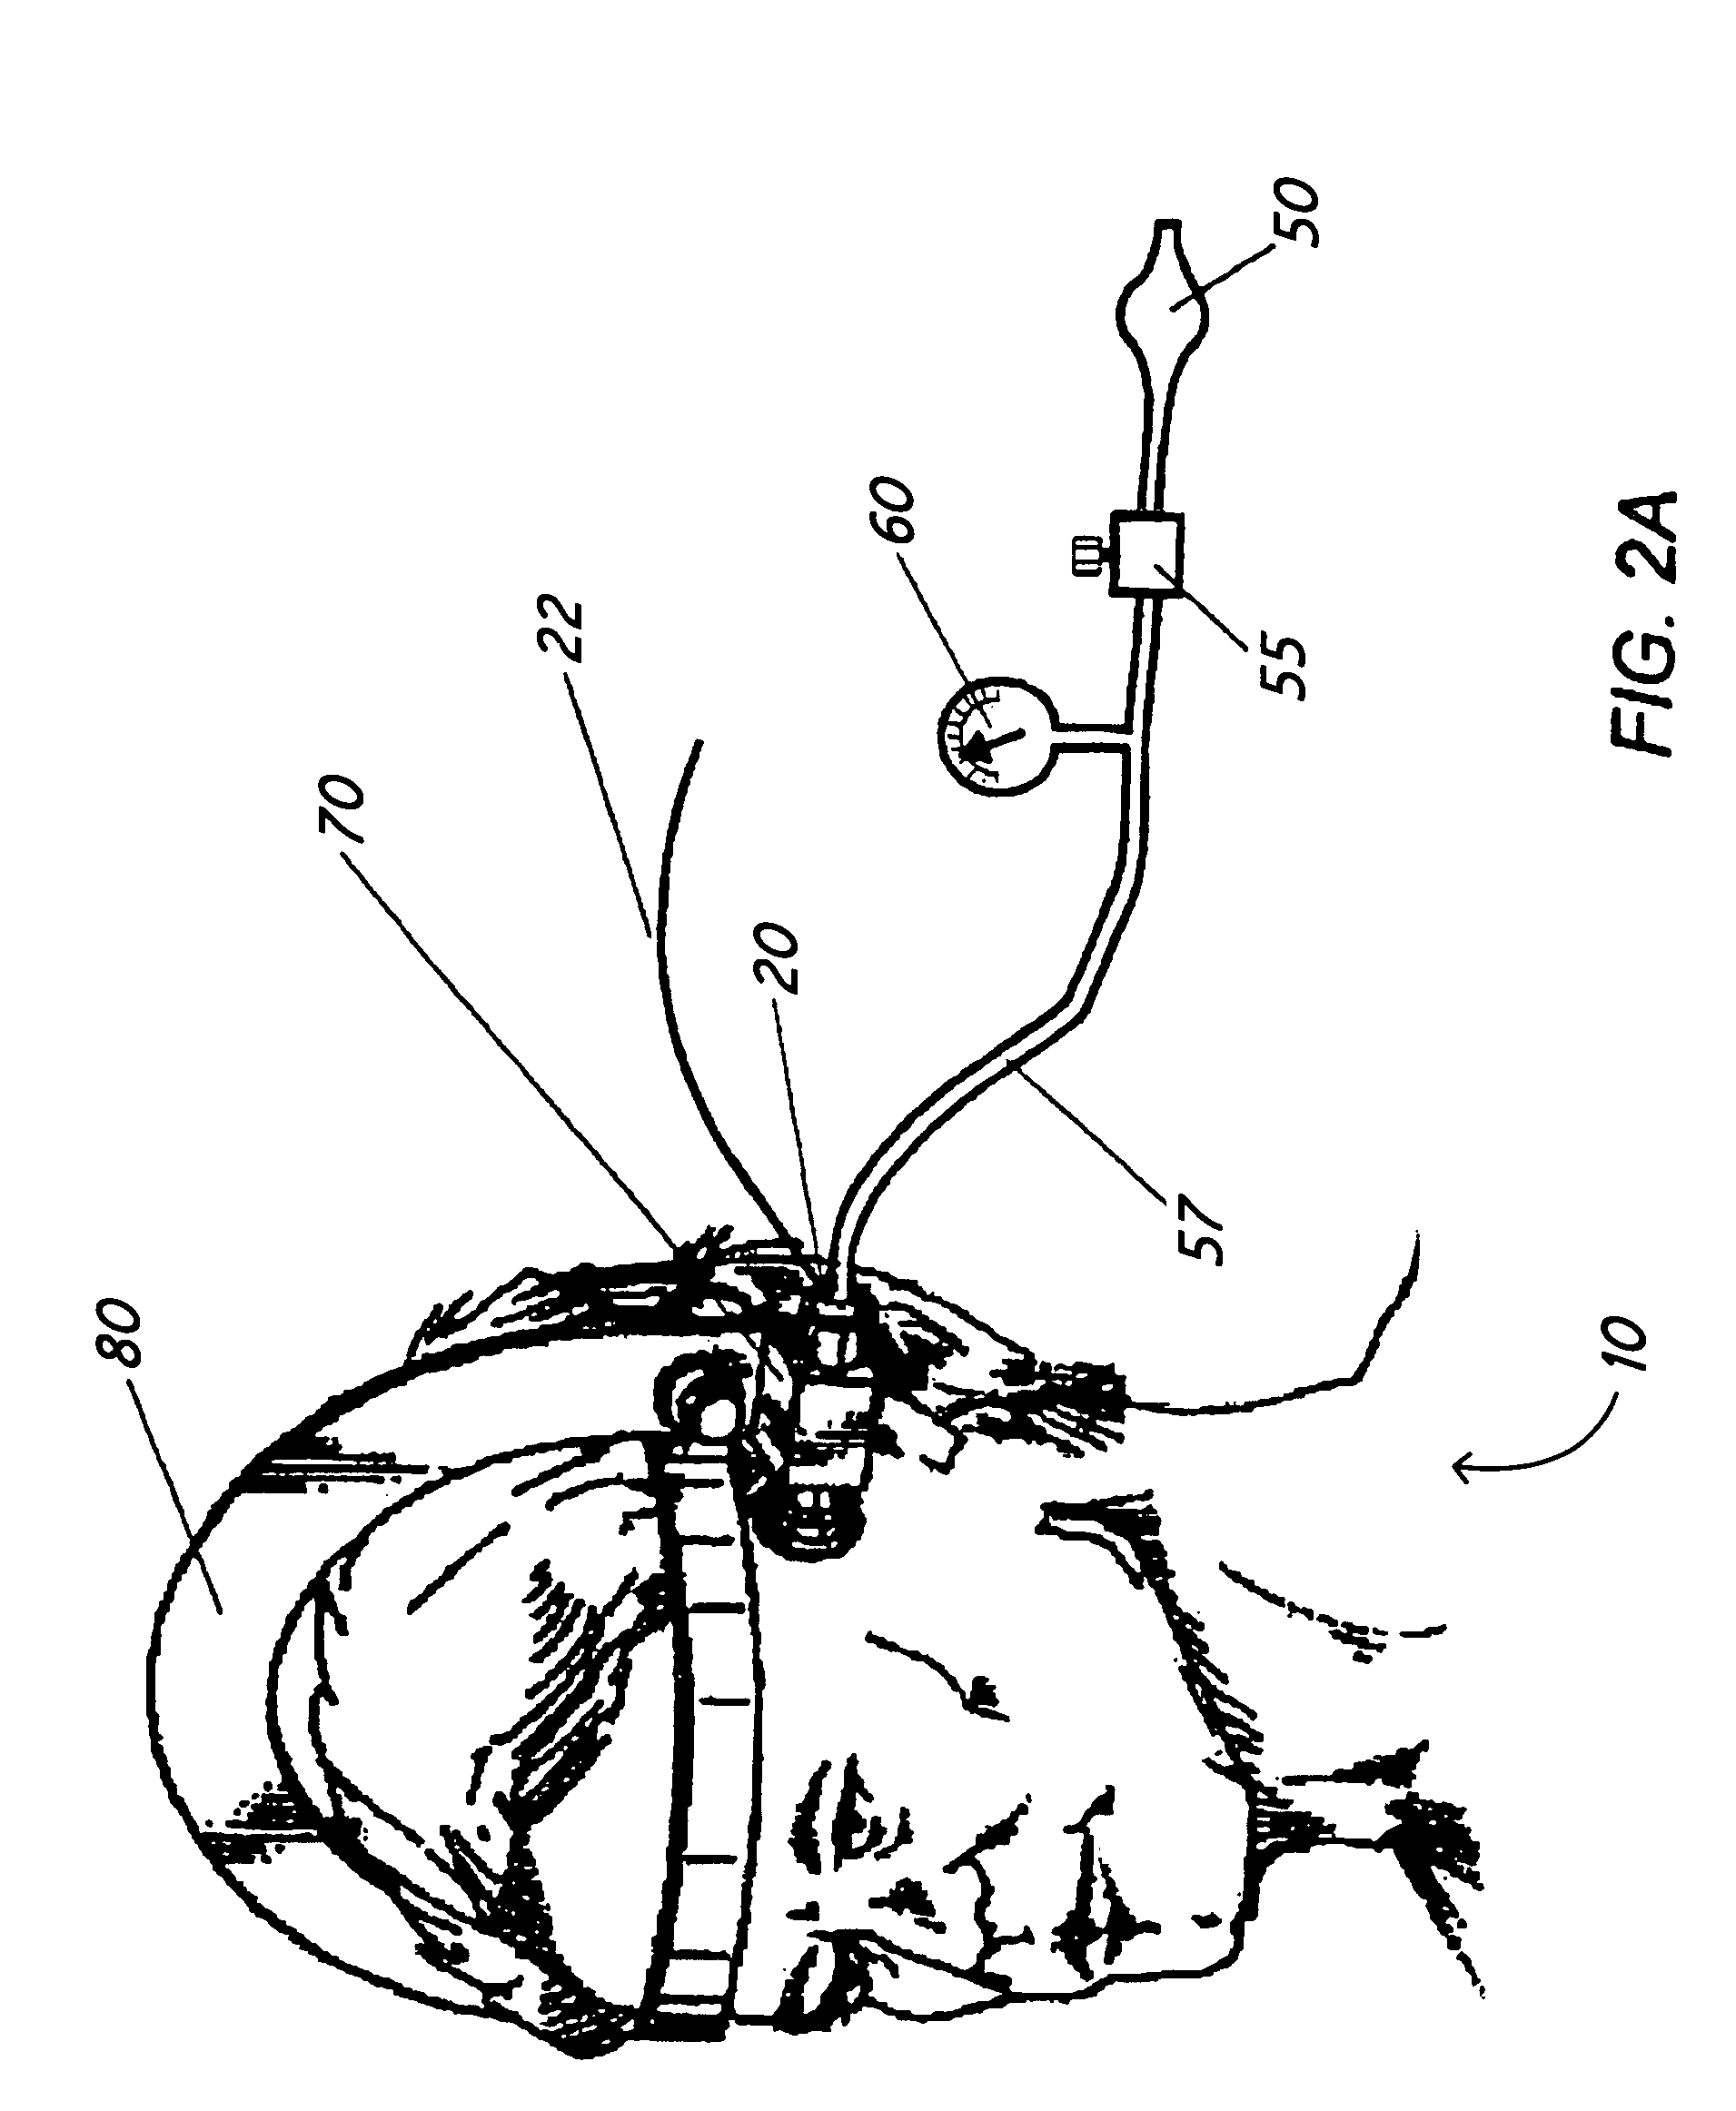 Method and apparatus for noninvasive determination of the absolute value of intracranial pressure